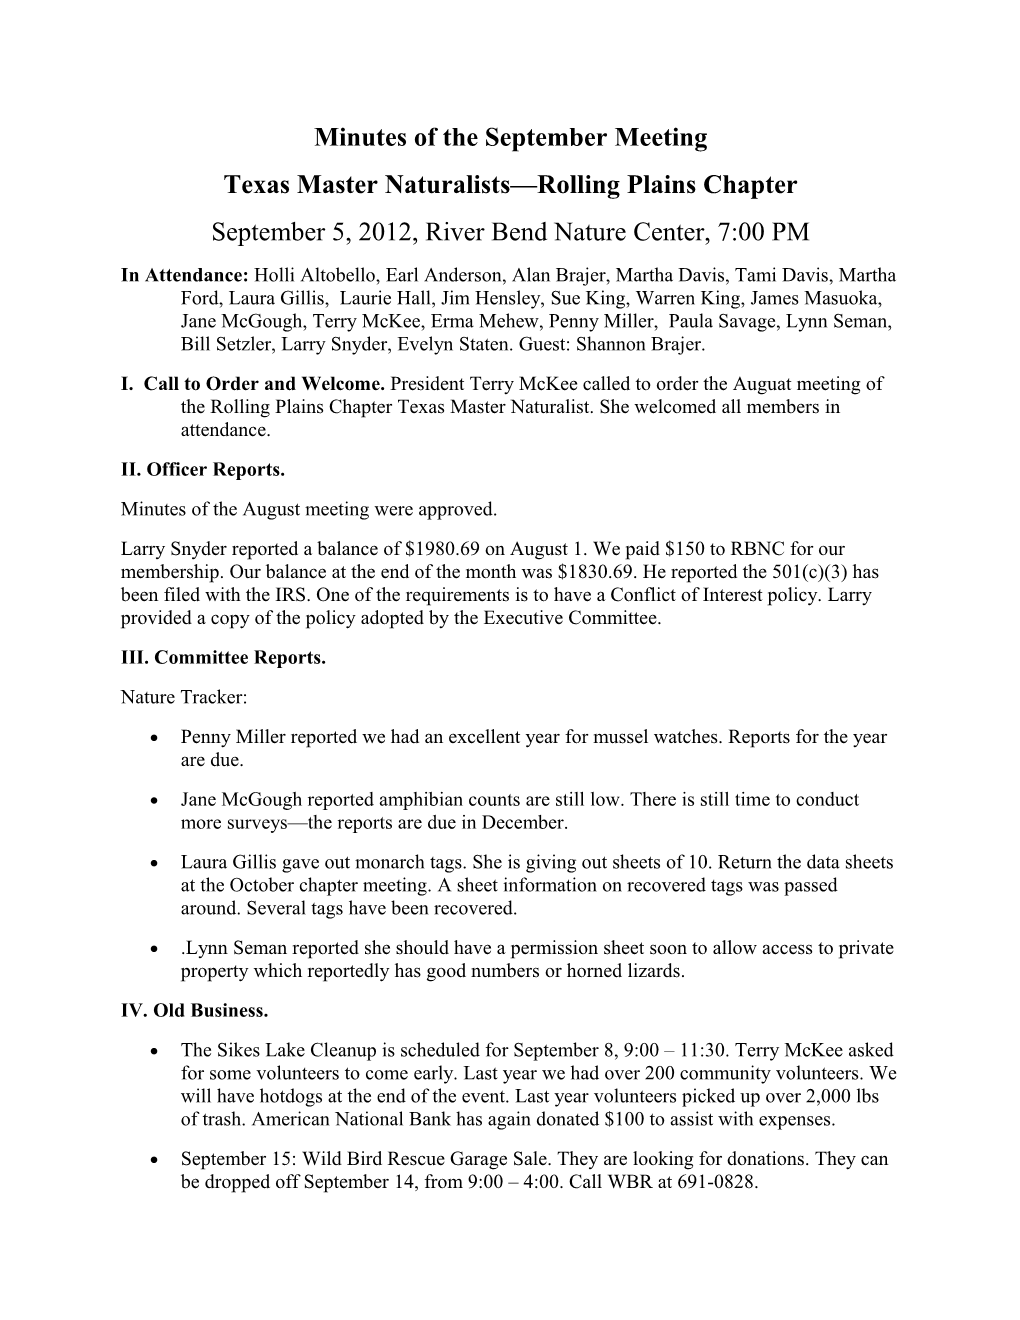 Texas Master Naturalists Rolling Plains Chapter